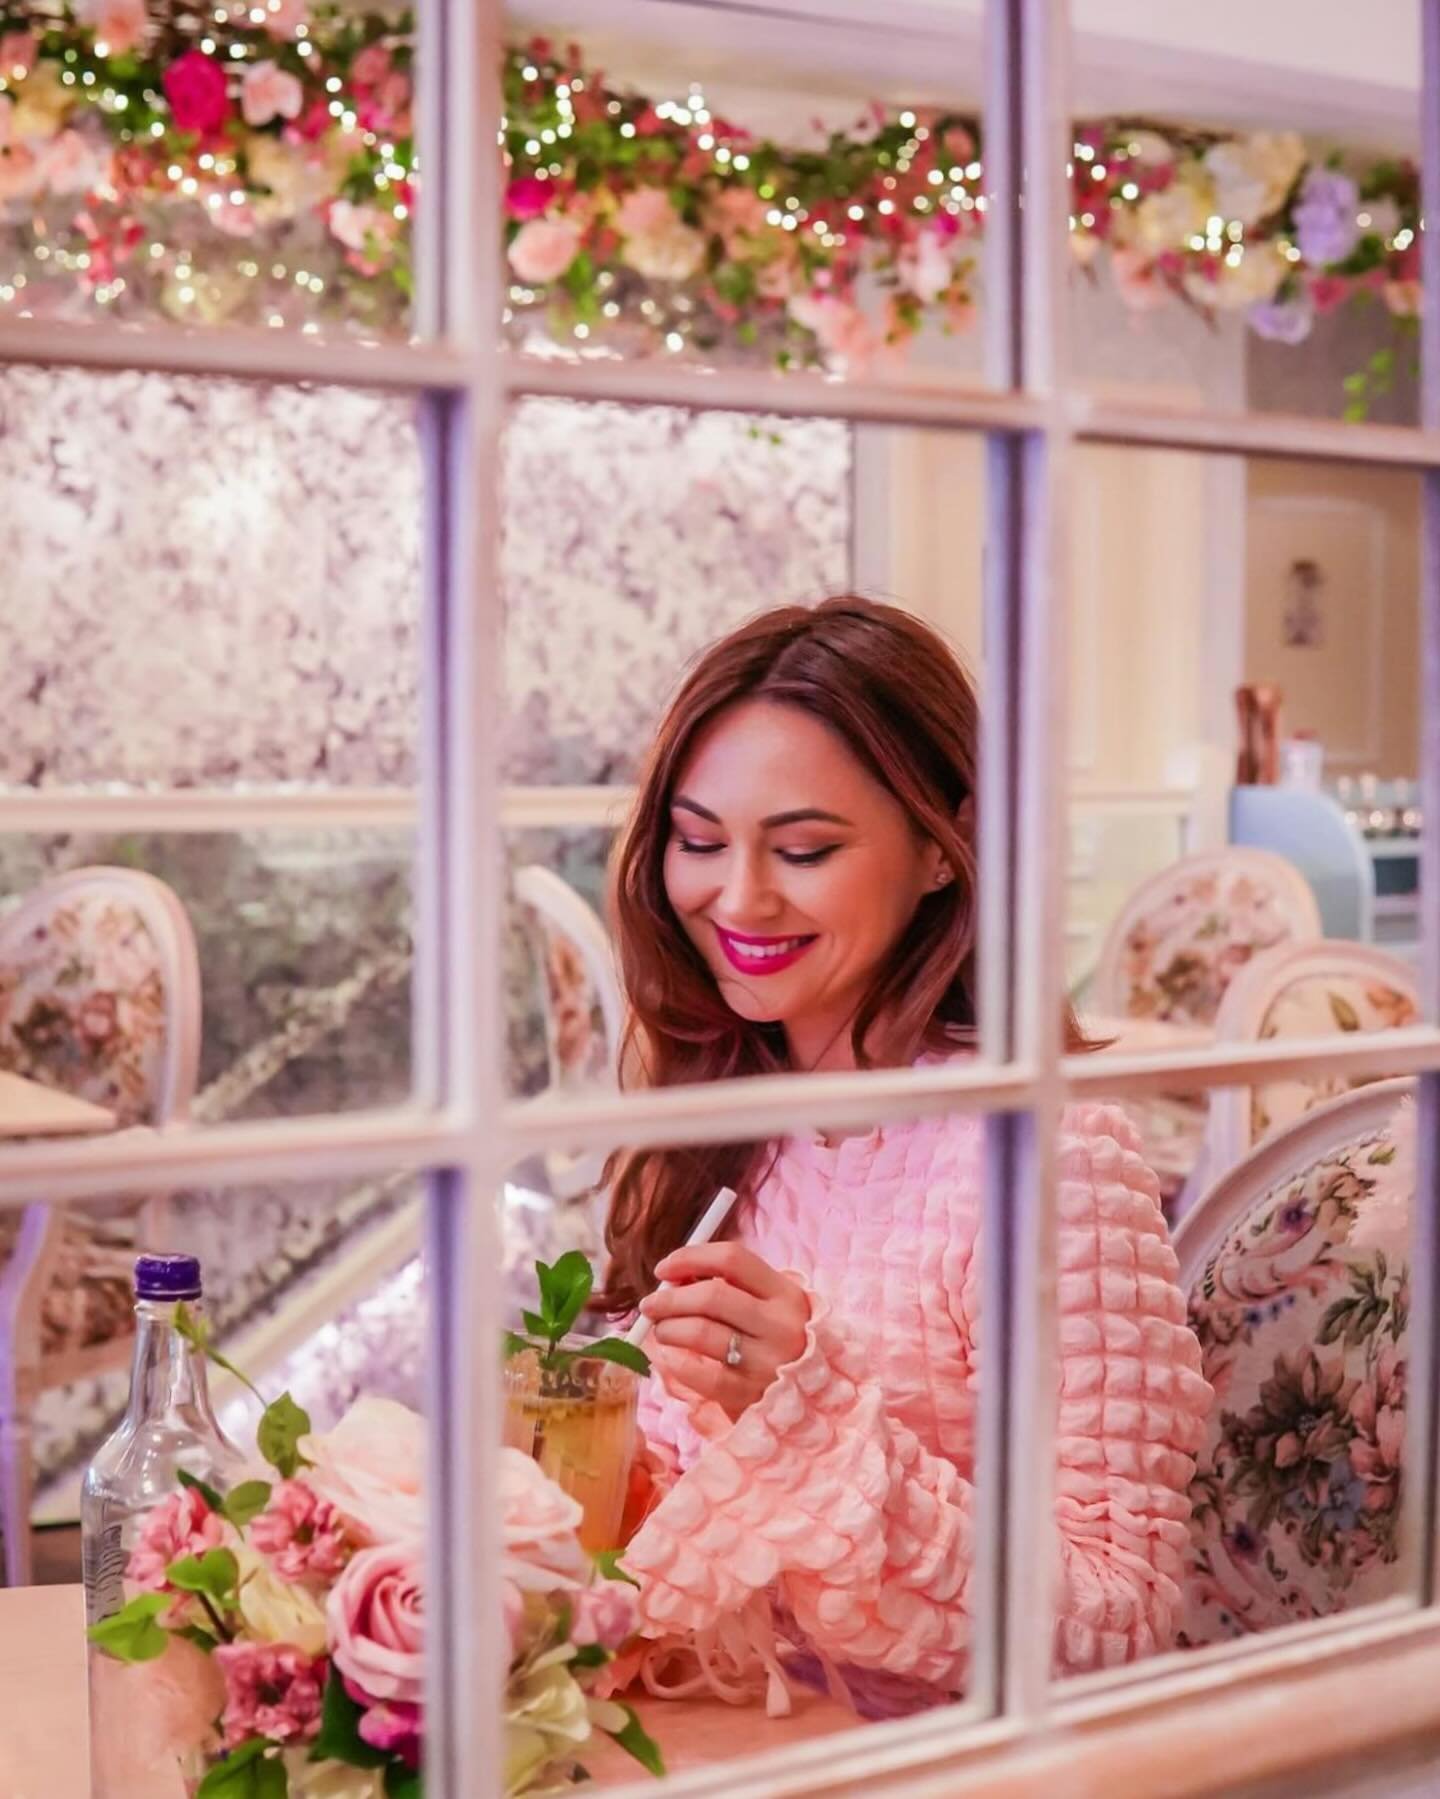 The most gorgeous dining experience in Mayfair! 💝🥯🍴Indulge in Om Waleed&rsquo;s most sensational al a carte menu from our 🌸 bloom-filled restaurant on Berkeley Street! 🌸

To reserve your table, visit our website or walk in at your convenience. ?